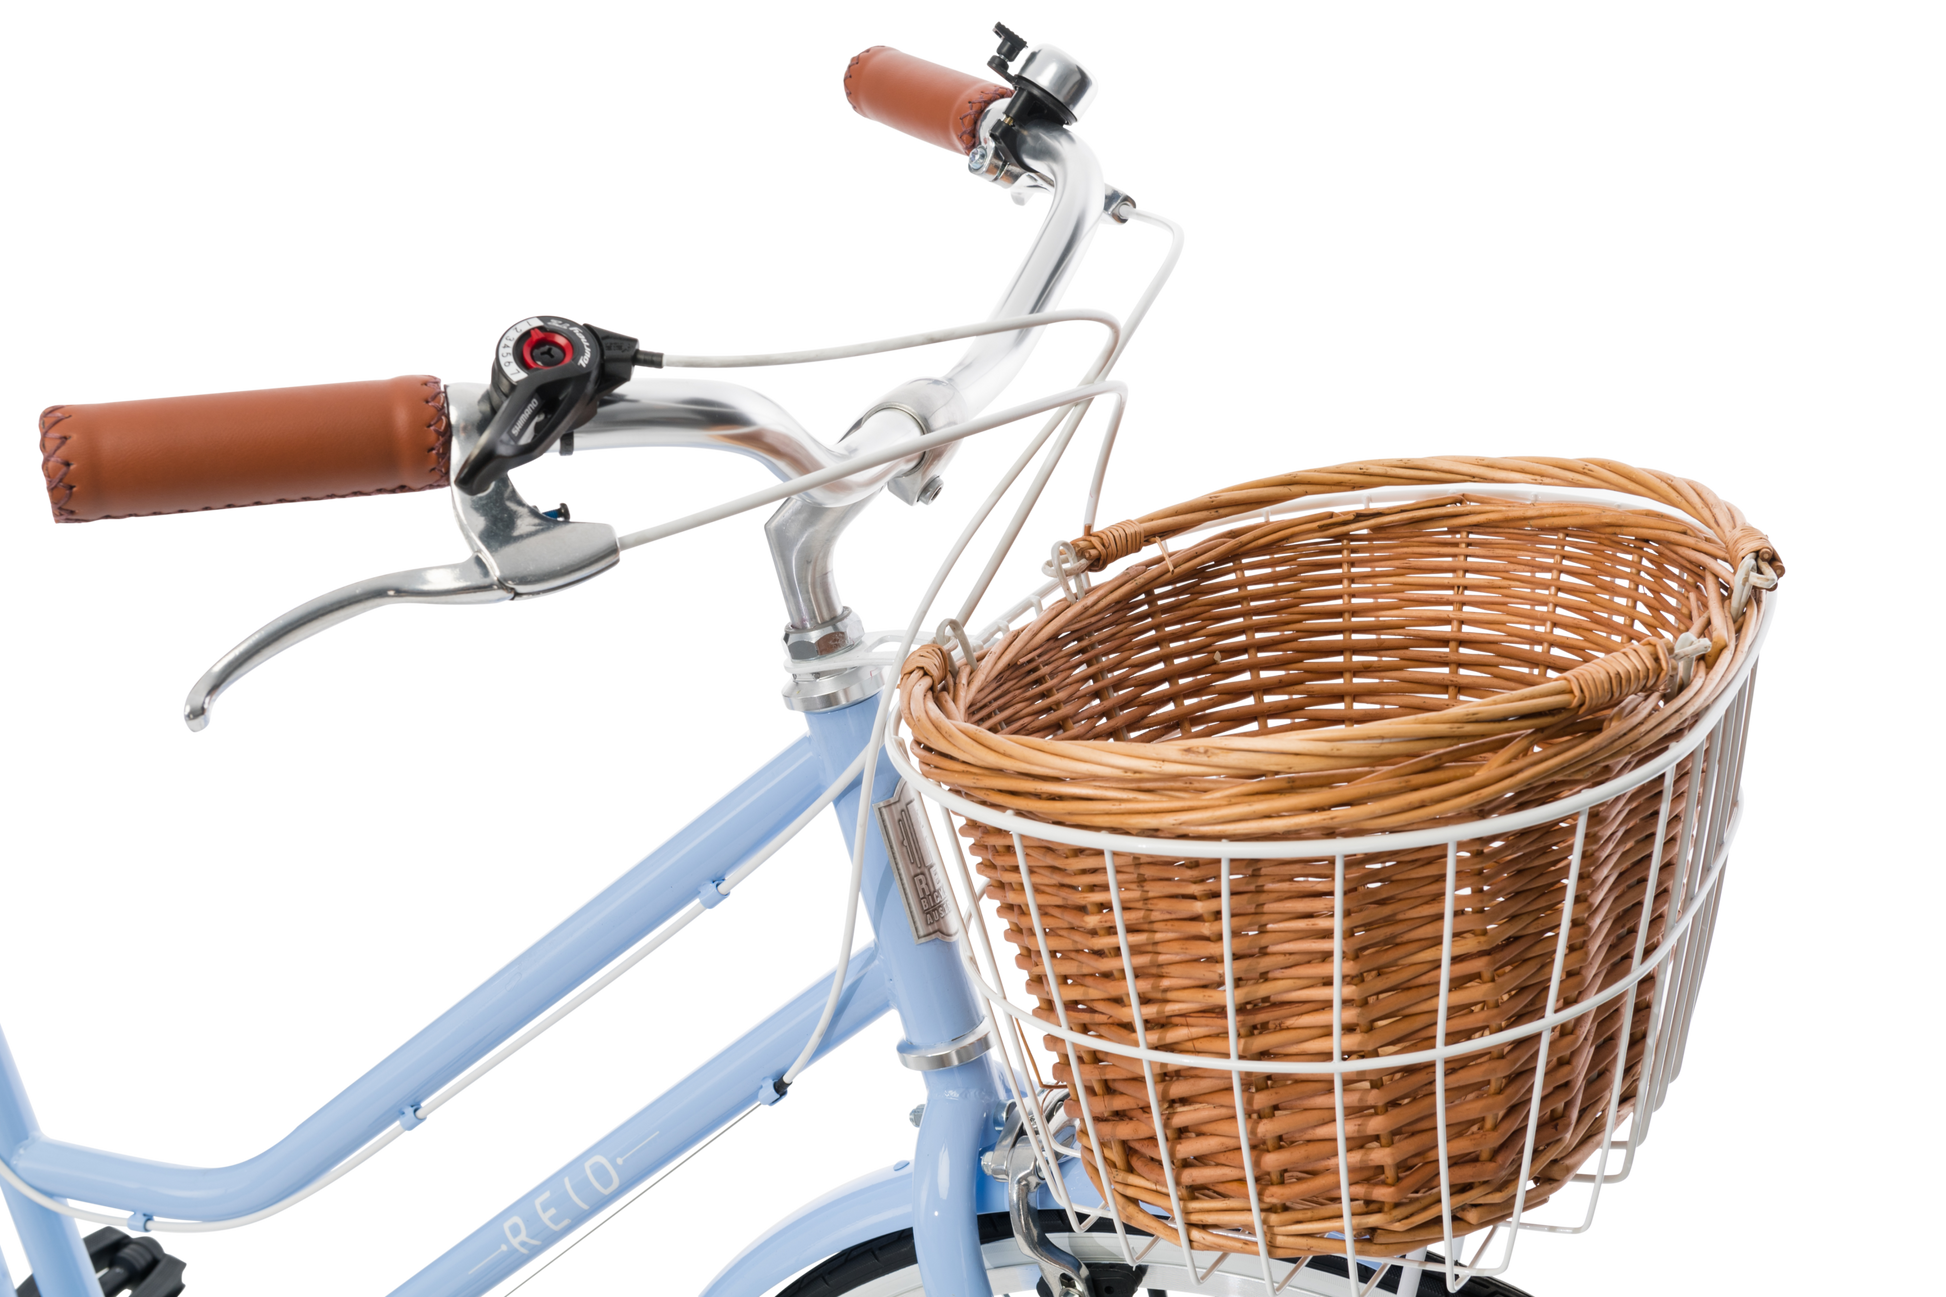 Ladies Classic Plus Vintage Bike in Sky Blue showing handlebars and front wicker basket from Reid Cycles